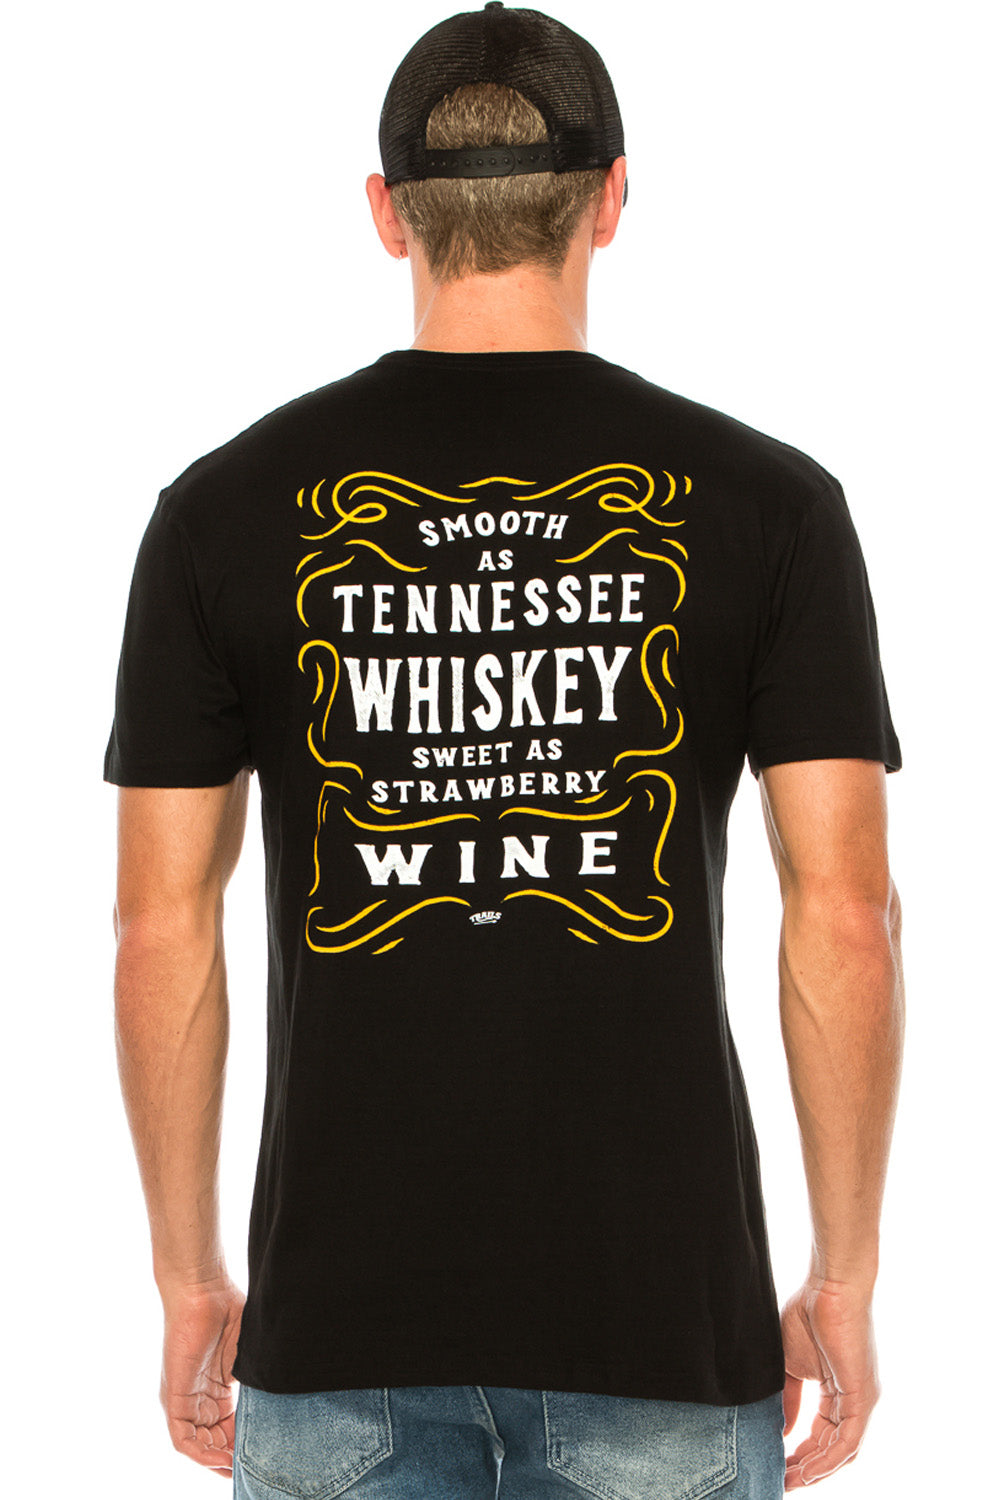 SMOOTH AS TENNESSEE WHISKEY MEN'S T-SHIRT - Trailsclothing.com